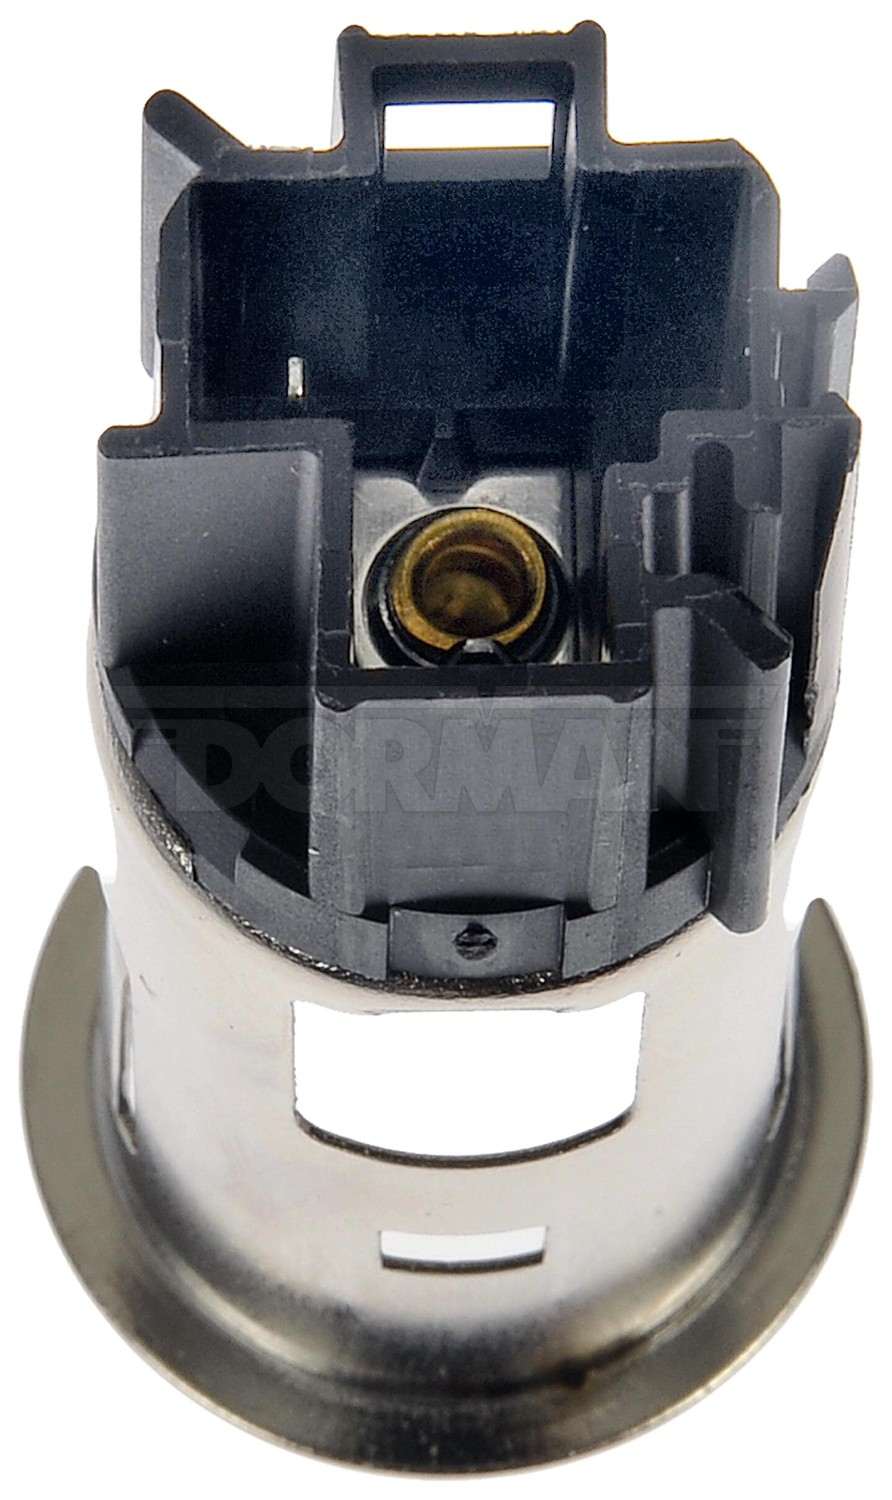 Front View of 12 Volt Accessory Power Outlet Socket DORMAN 926-330